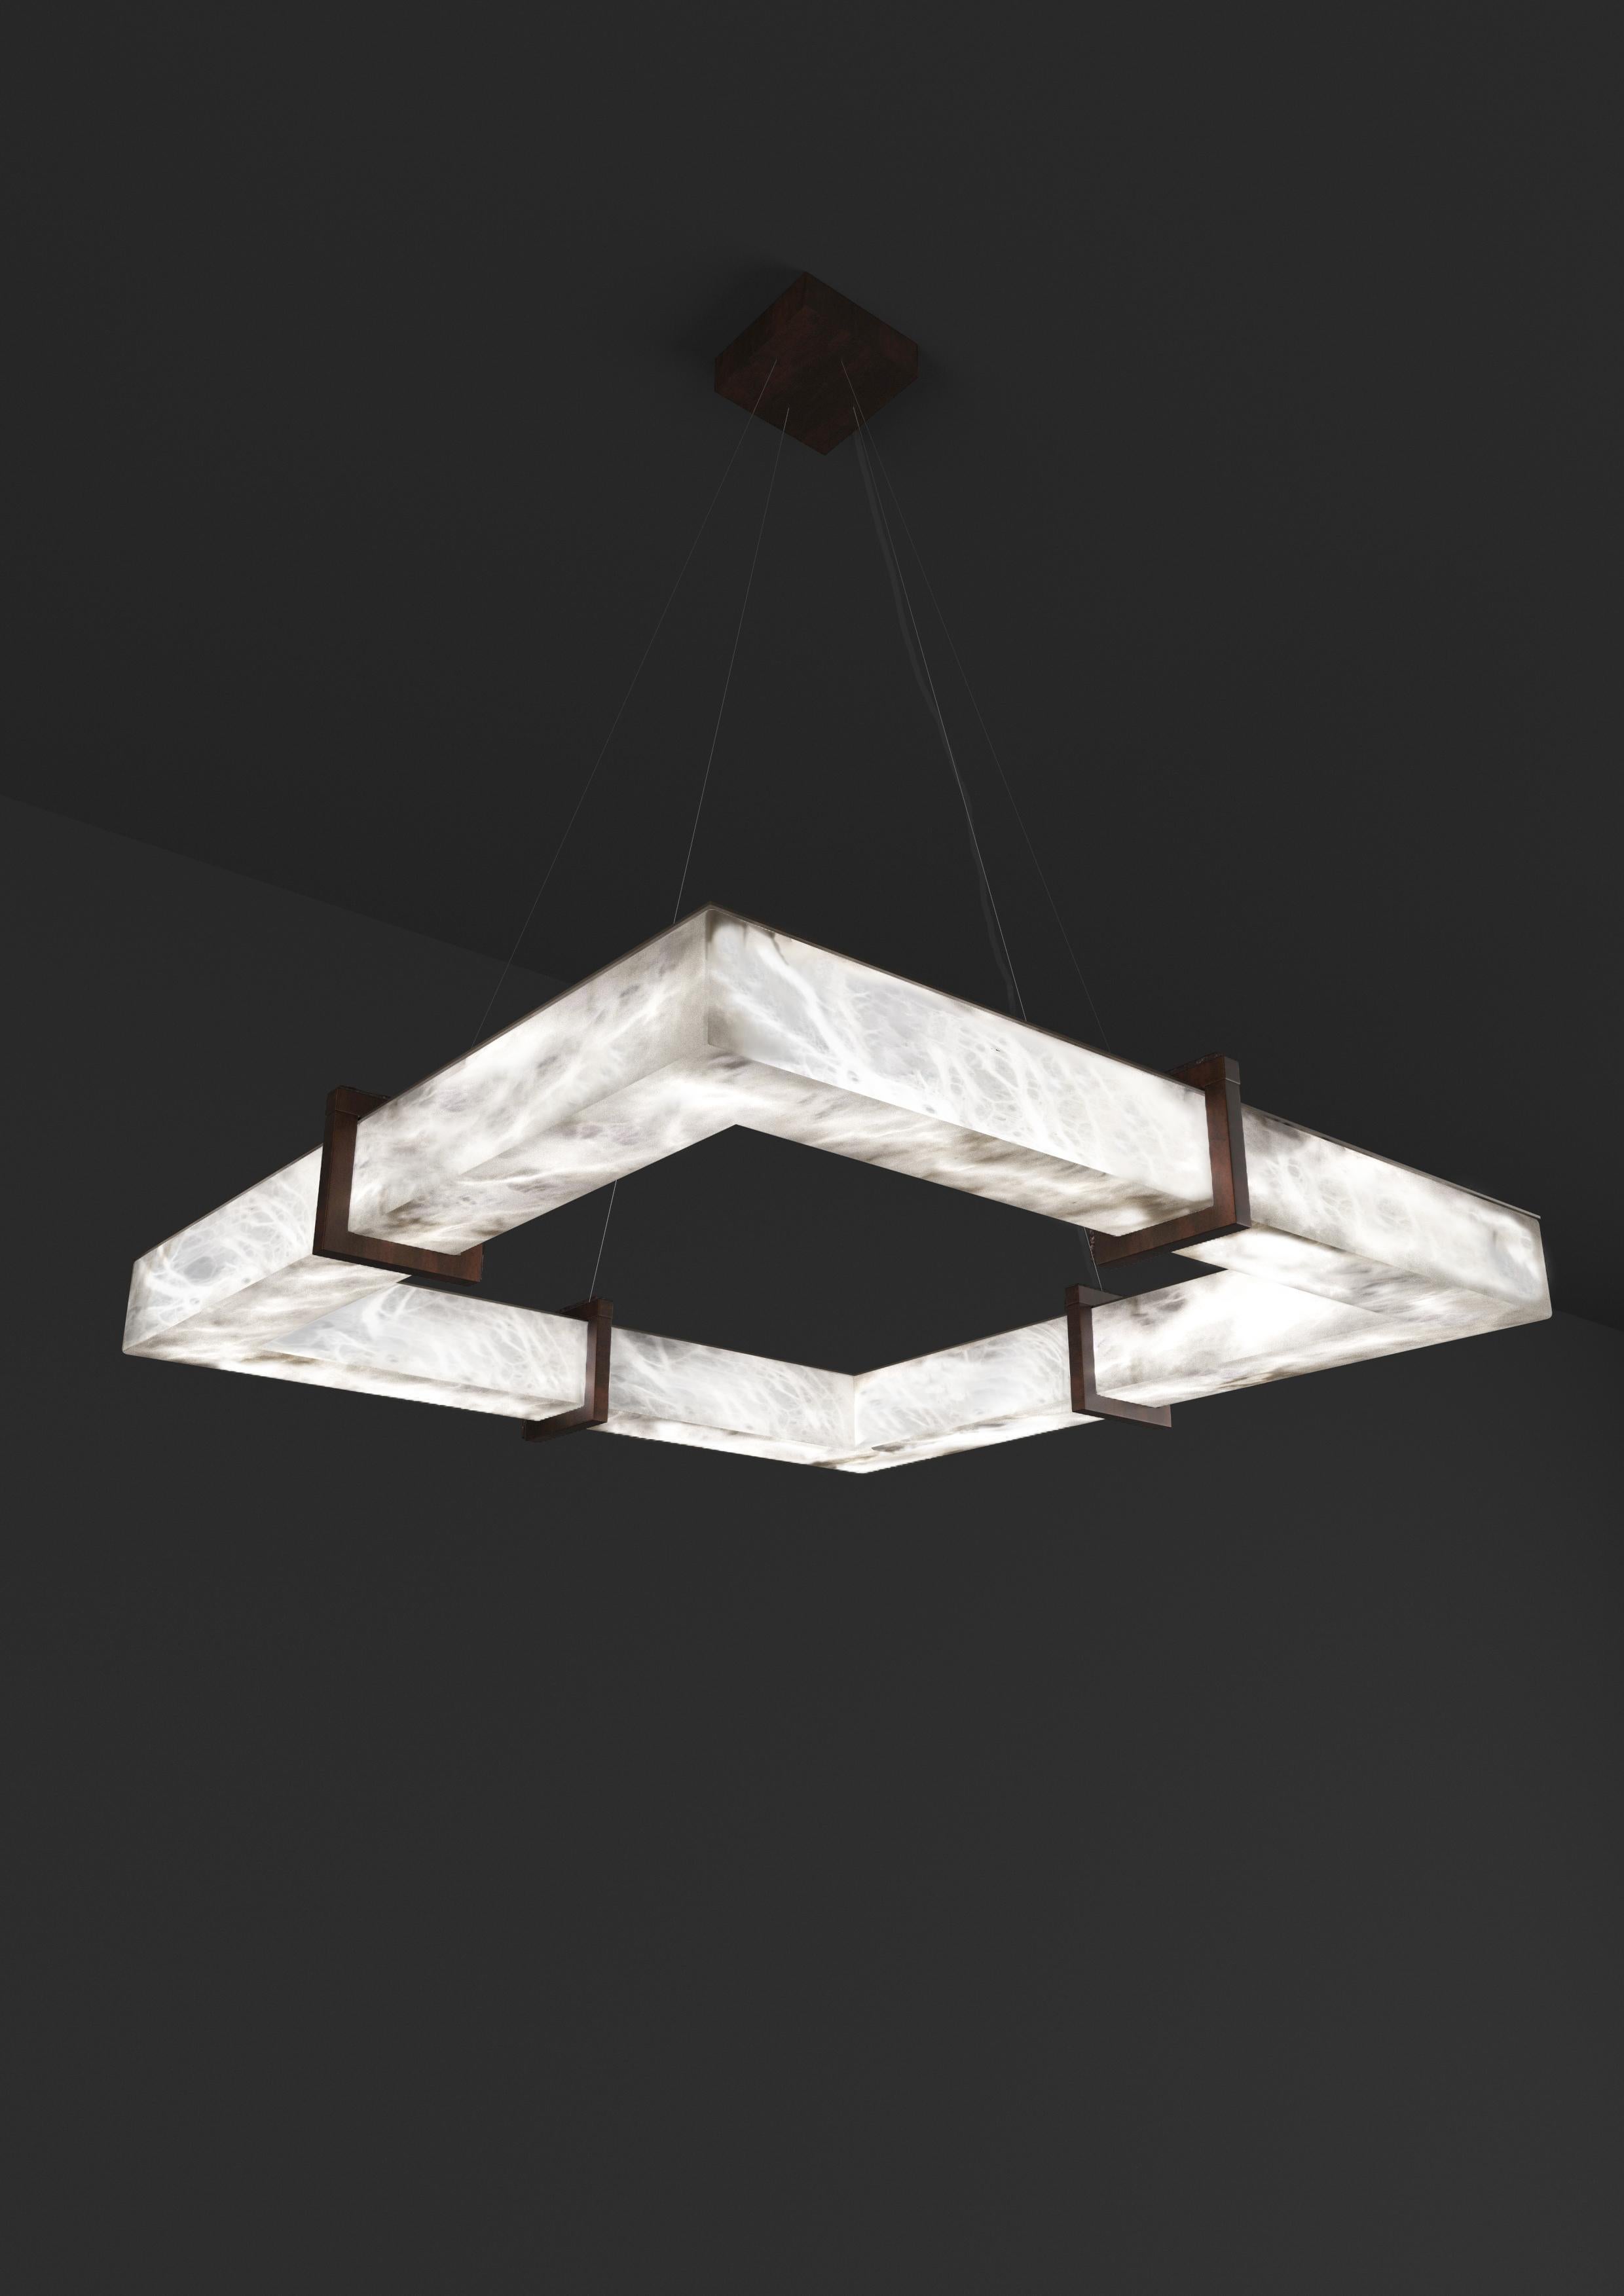 Talassa Ruggine Of Florence Metal Pendant Lamp by Alabastro Italiano
Dimensions: D 80 x W 80 x H 11 cm.
Materials: White alabaster and metal.

Available in different finishes: Shiny Silver, Bronze, Brushed Brass, Ruggine of Florence, Brushed